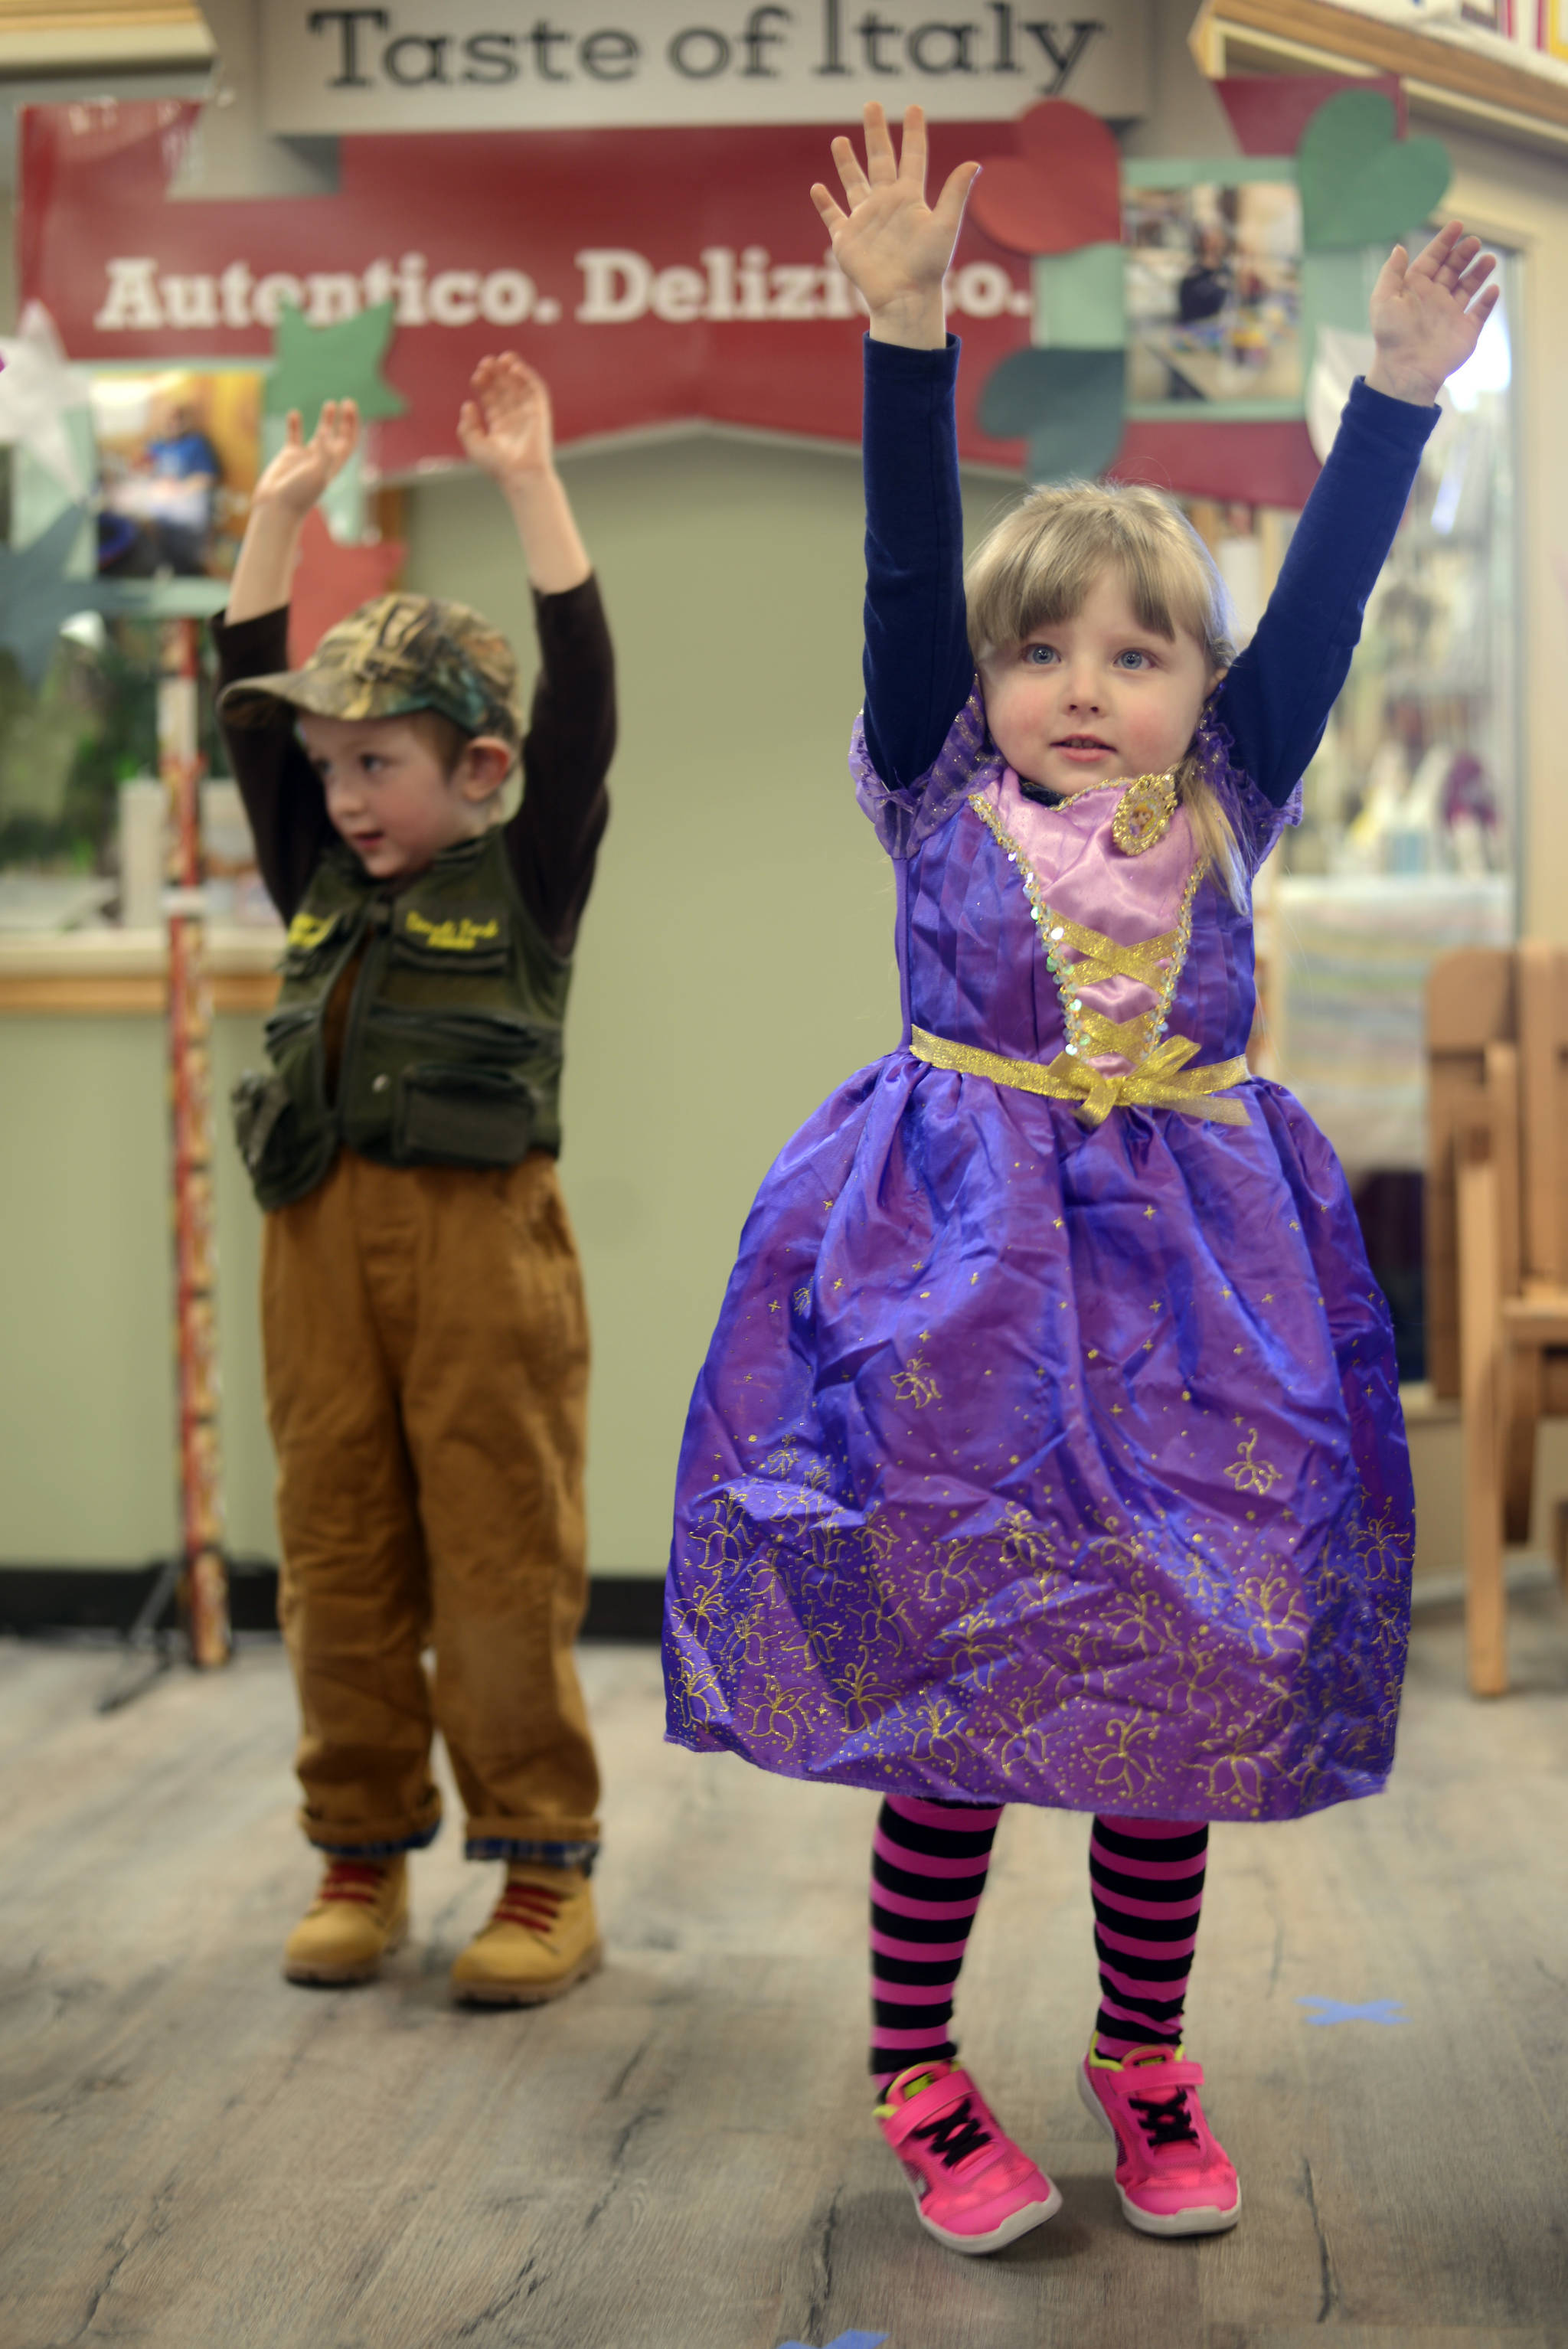 Weston Gorup and Sophia Marcorelle performed during the annual benefit for Sterling-Soldotna HeadStart on Friday, March 24. 2017 at the Sterling Senior Center in Sterling, Alaska. The benefit, which had a Taste of Italy theme, included dinner, performances and an auction. (Kat Sorensen/Peninsula Clarion)